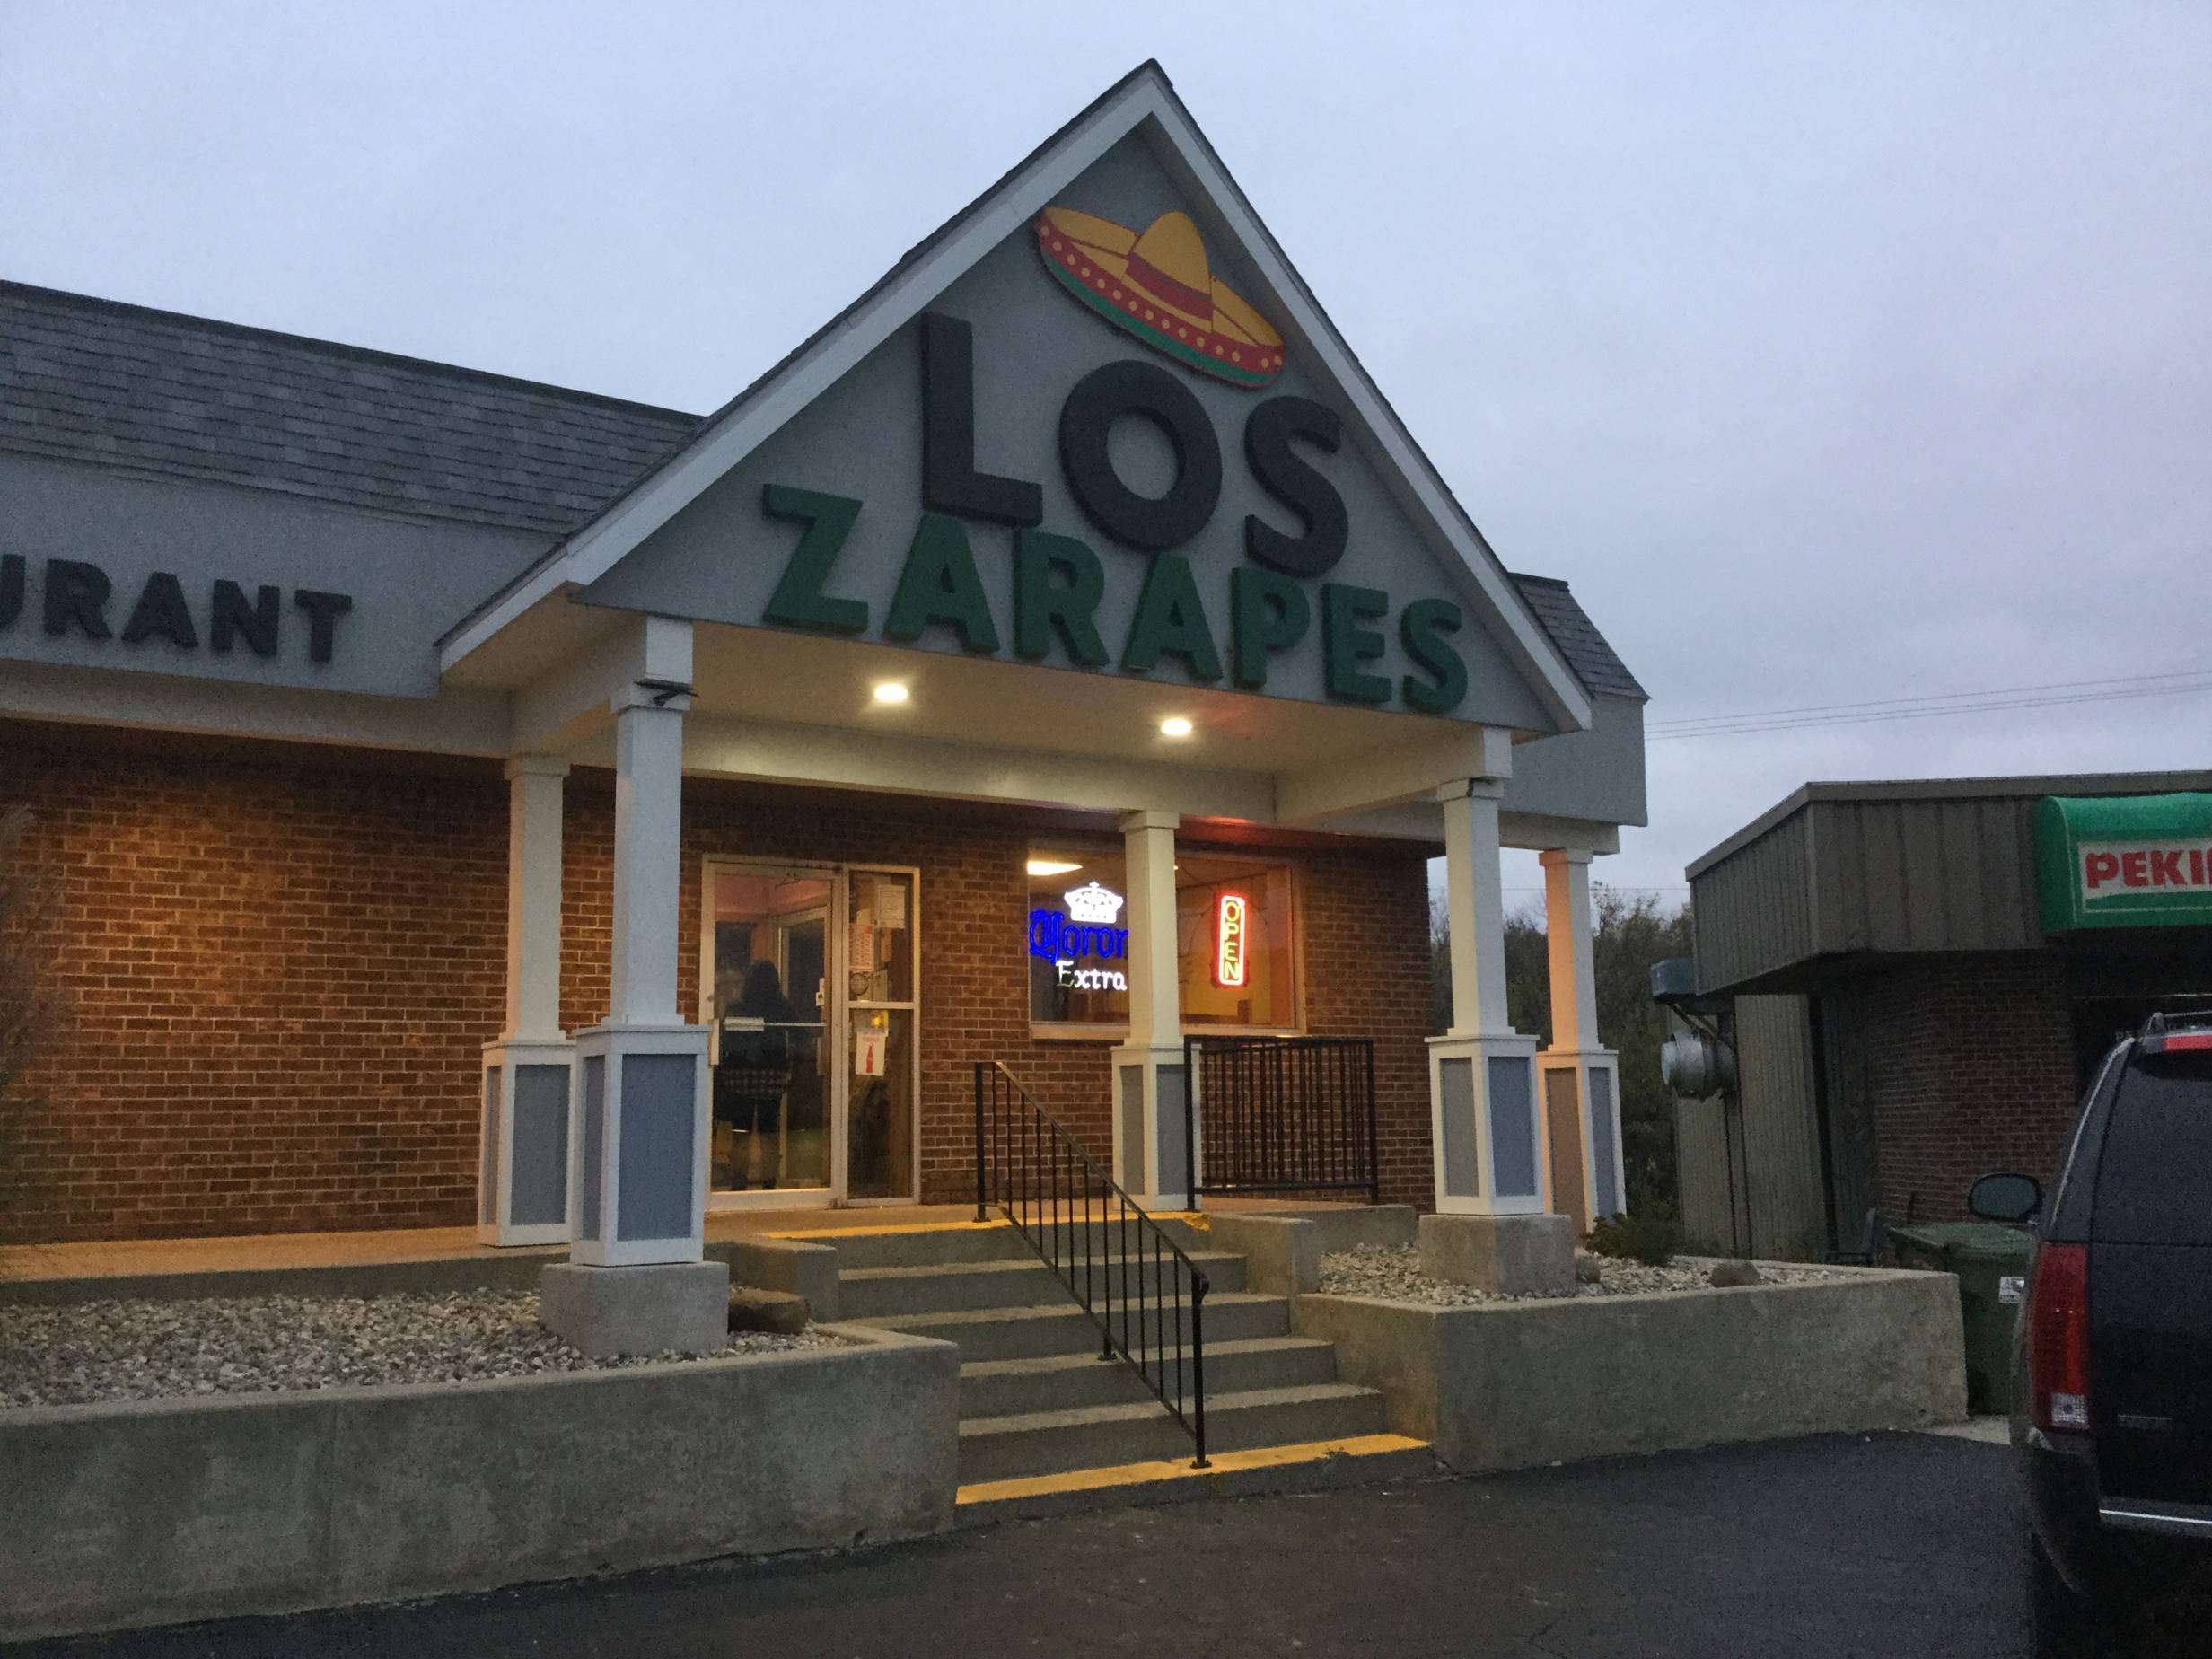 Los Zarapes is worth a trip to Mahomet’s north side